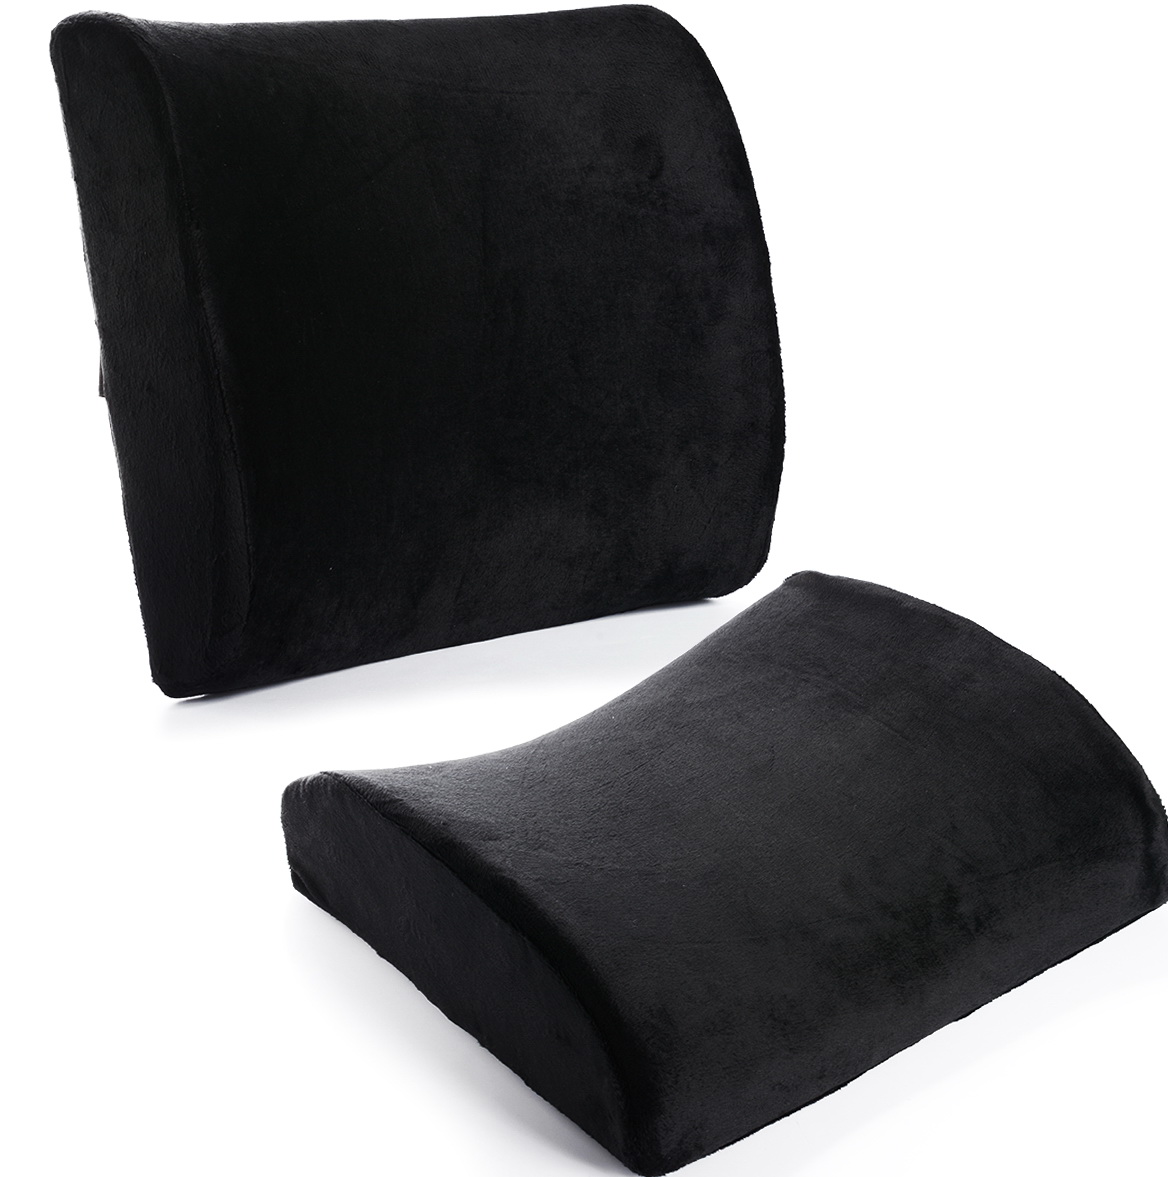 Seat Cushion For Lower Back Pain | Home Design Ideas